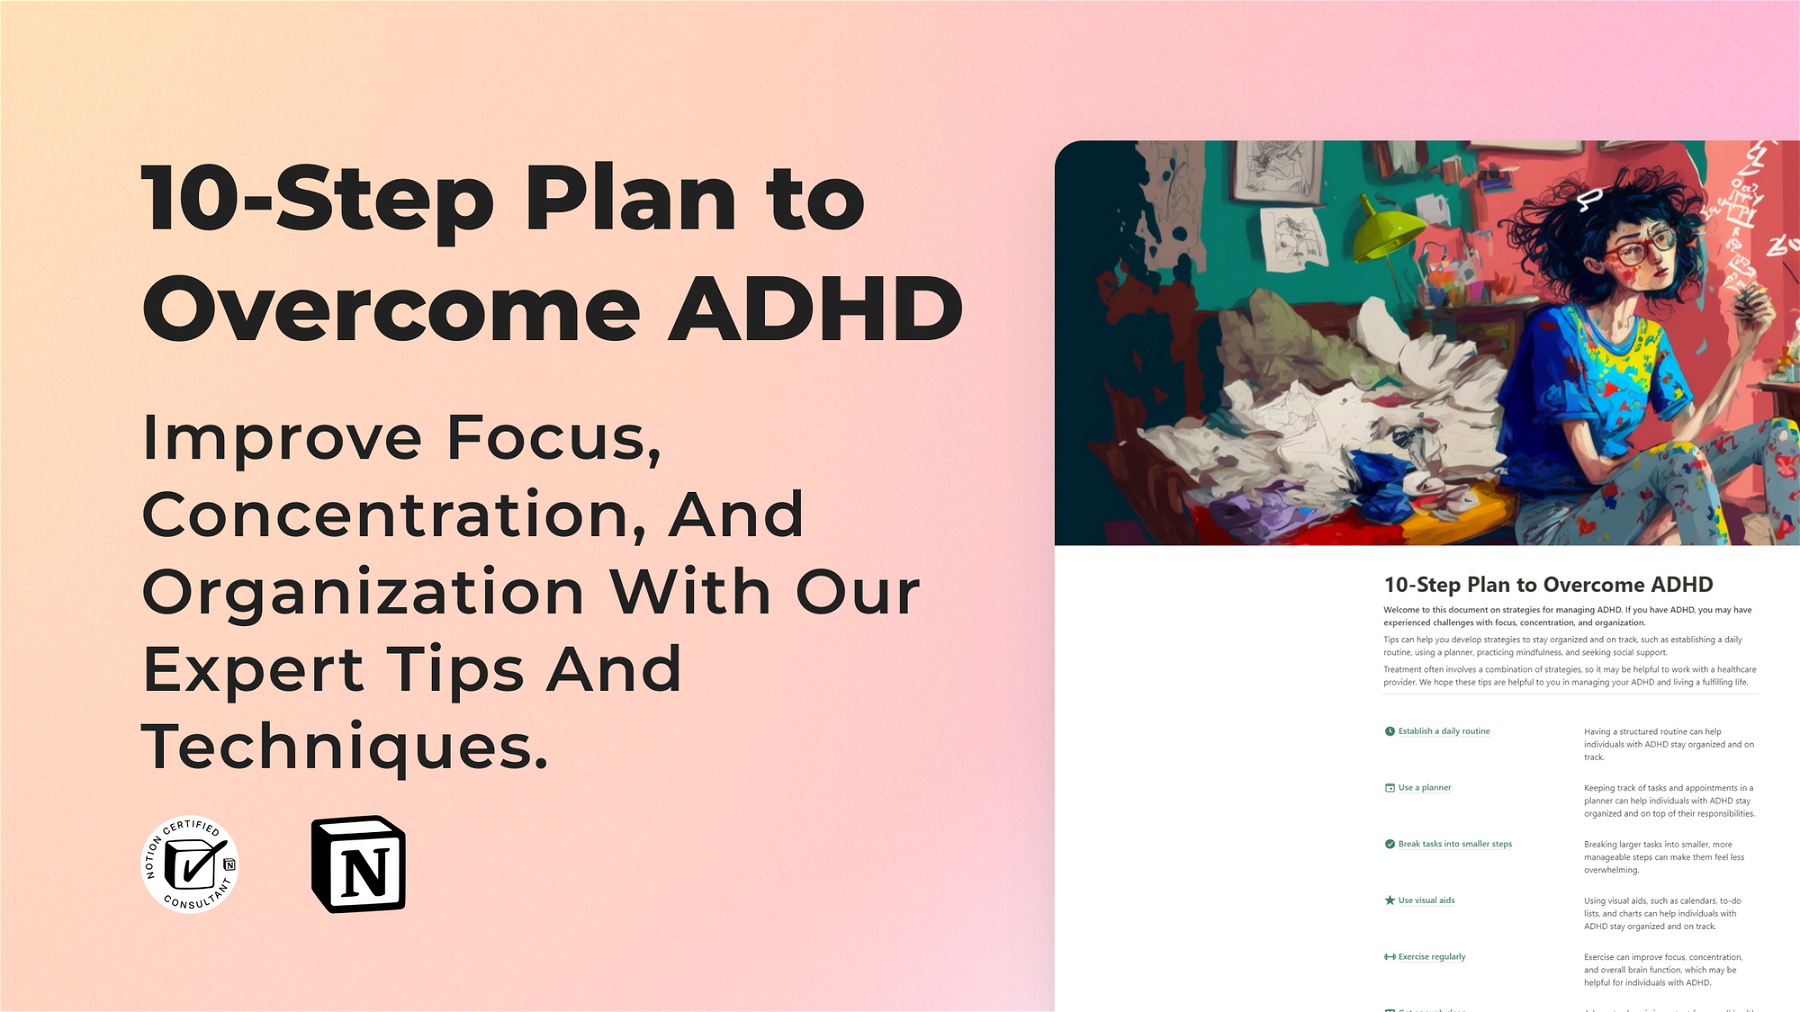 ­ЪДа Transform ADHD challenges into opportunities - 10-Step Plan to Overcome ADHD